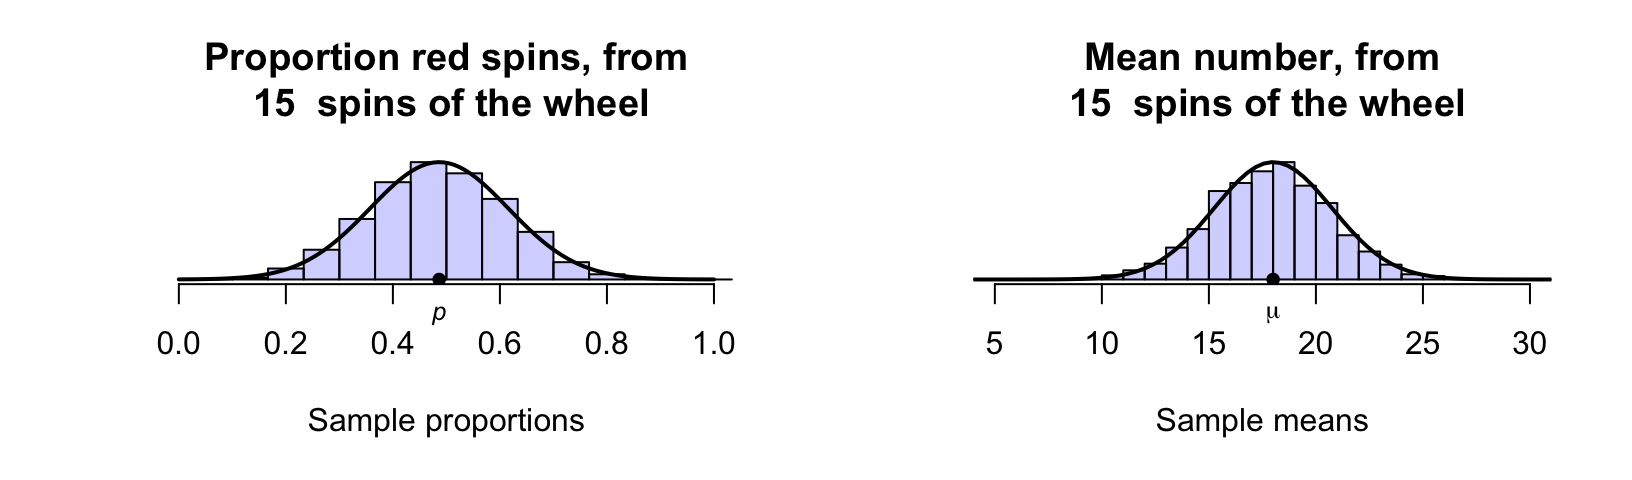 Sampling distributions for the proportion of red spins (left), and the mean of the numbers after $15$ roulette wheel spins (right) are approximate normal distributions